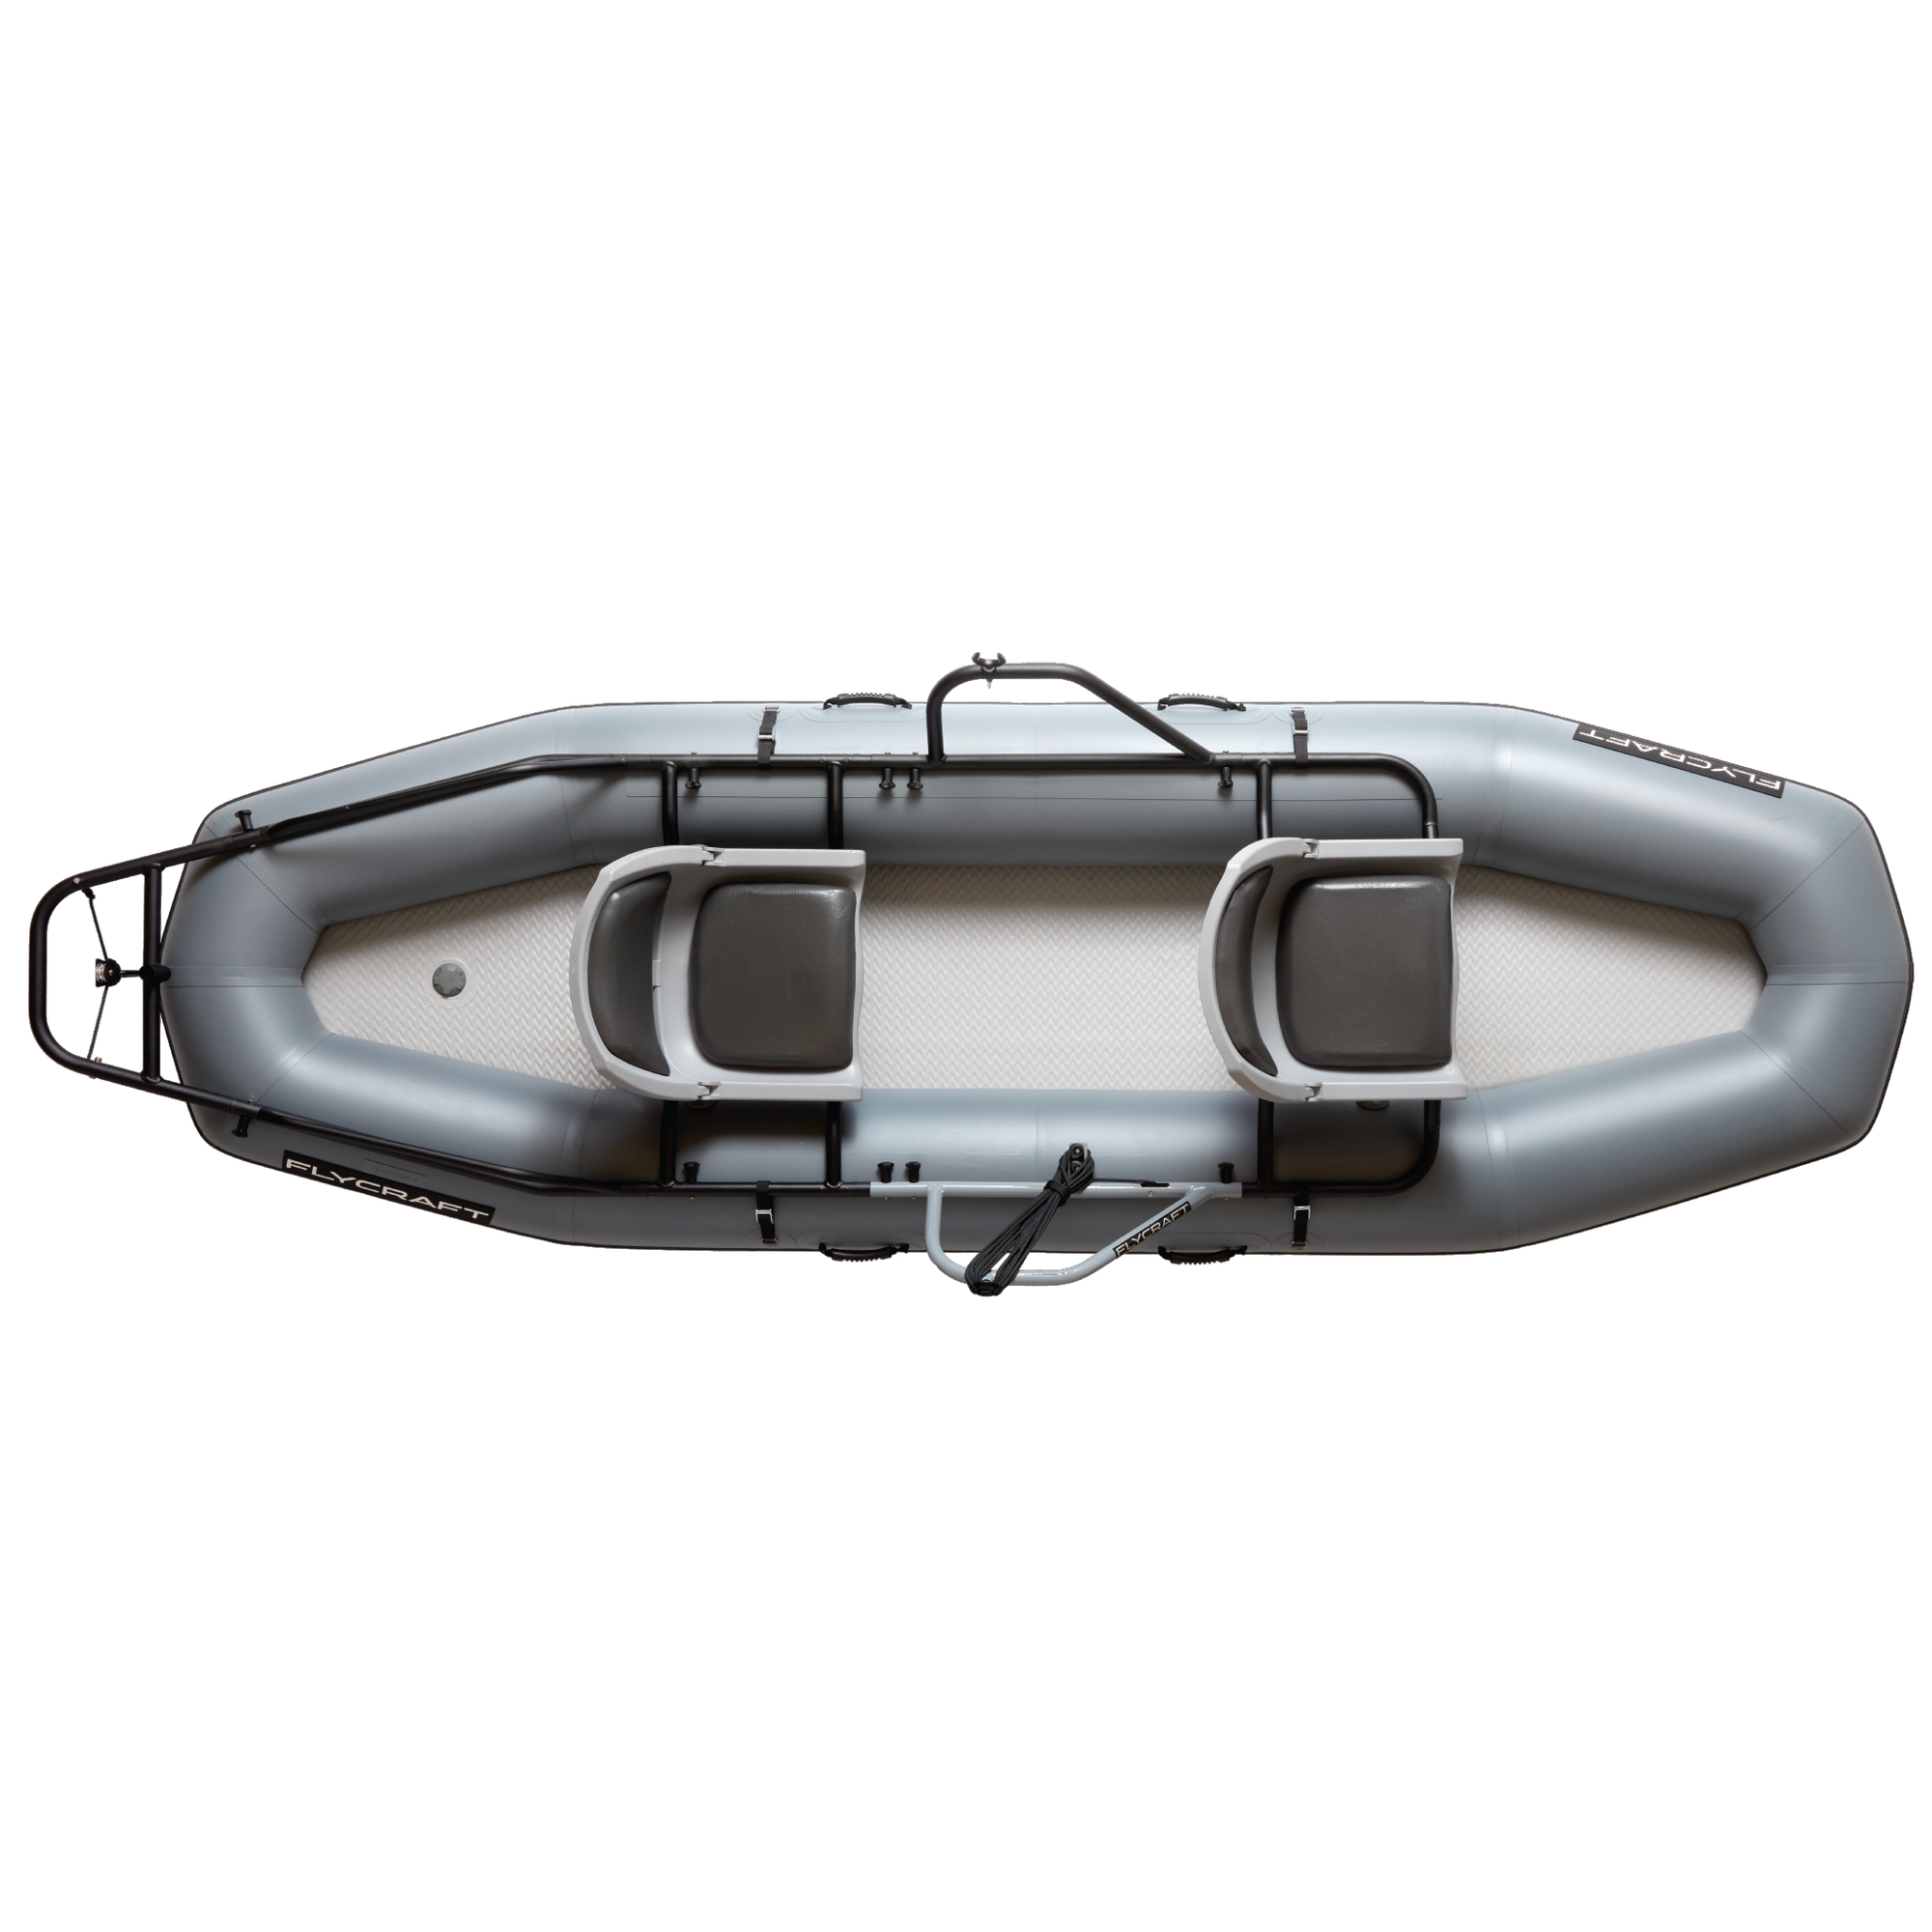 Flycraft’s Inflatable Fishing Boat: Stealth Base Package (2-Man)